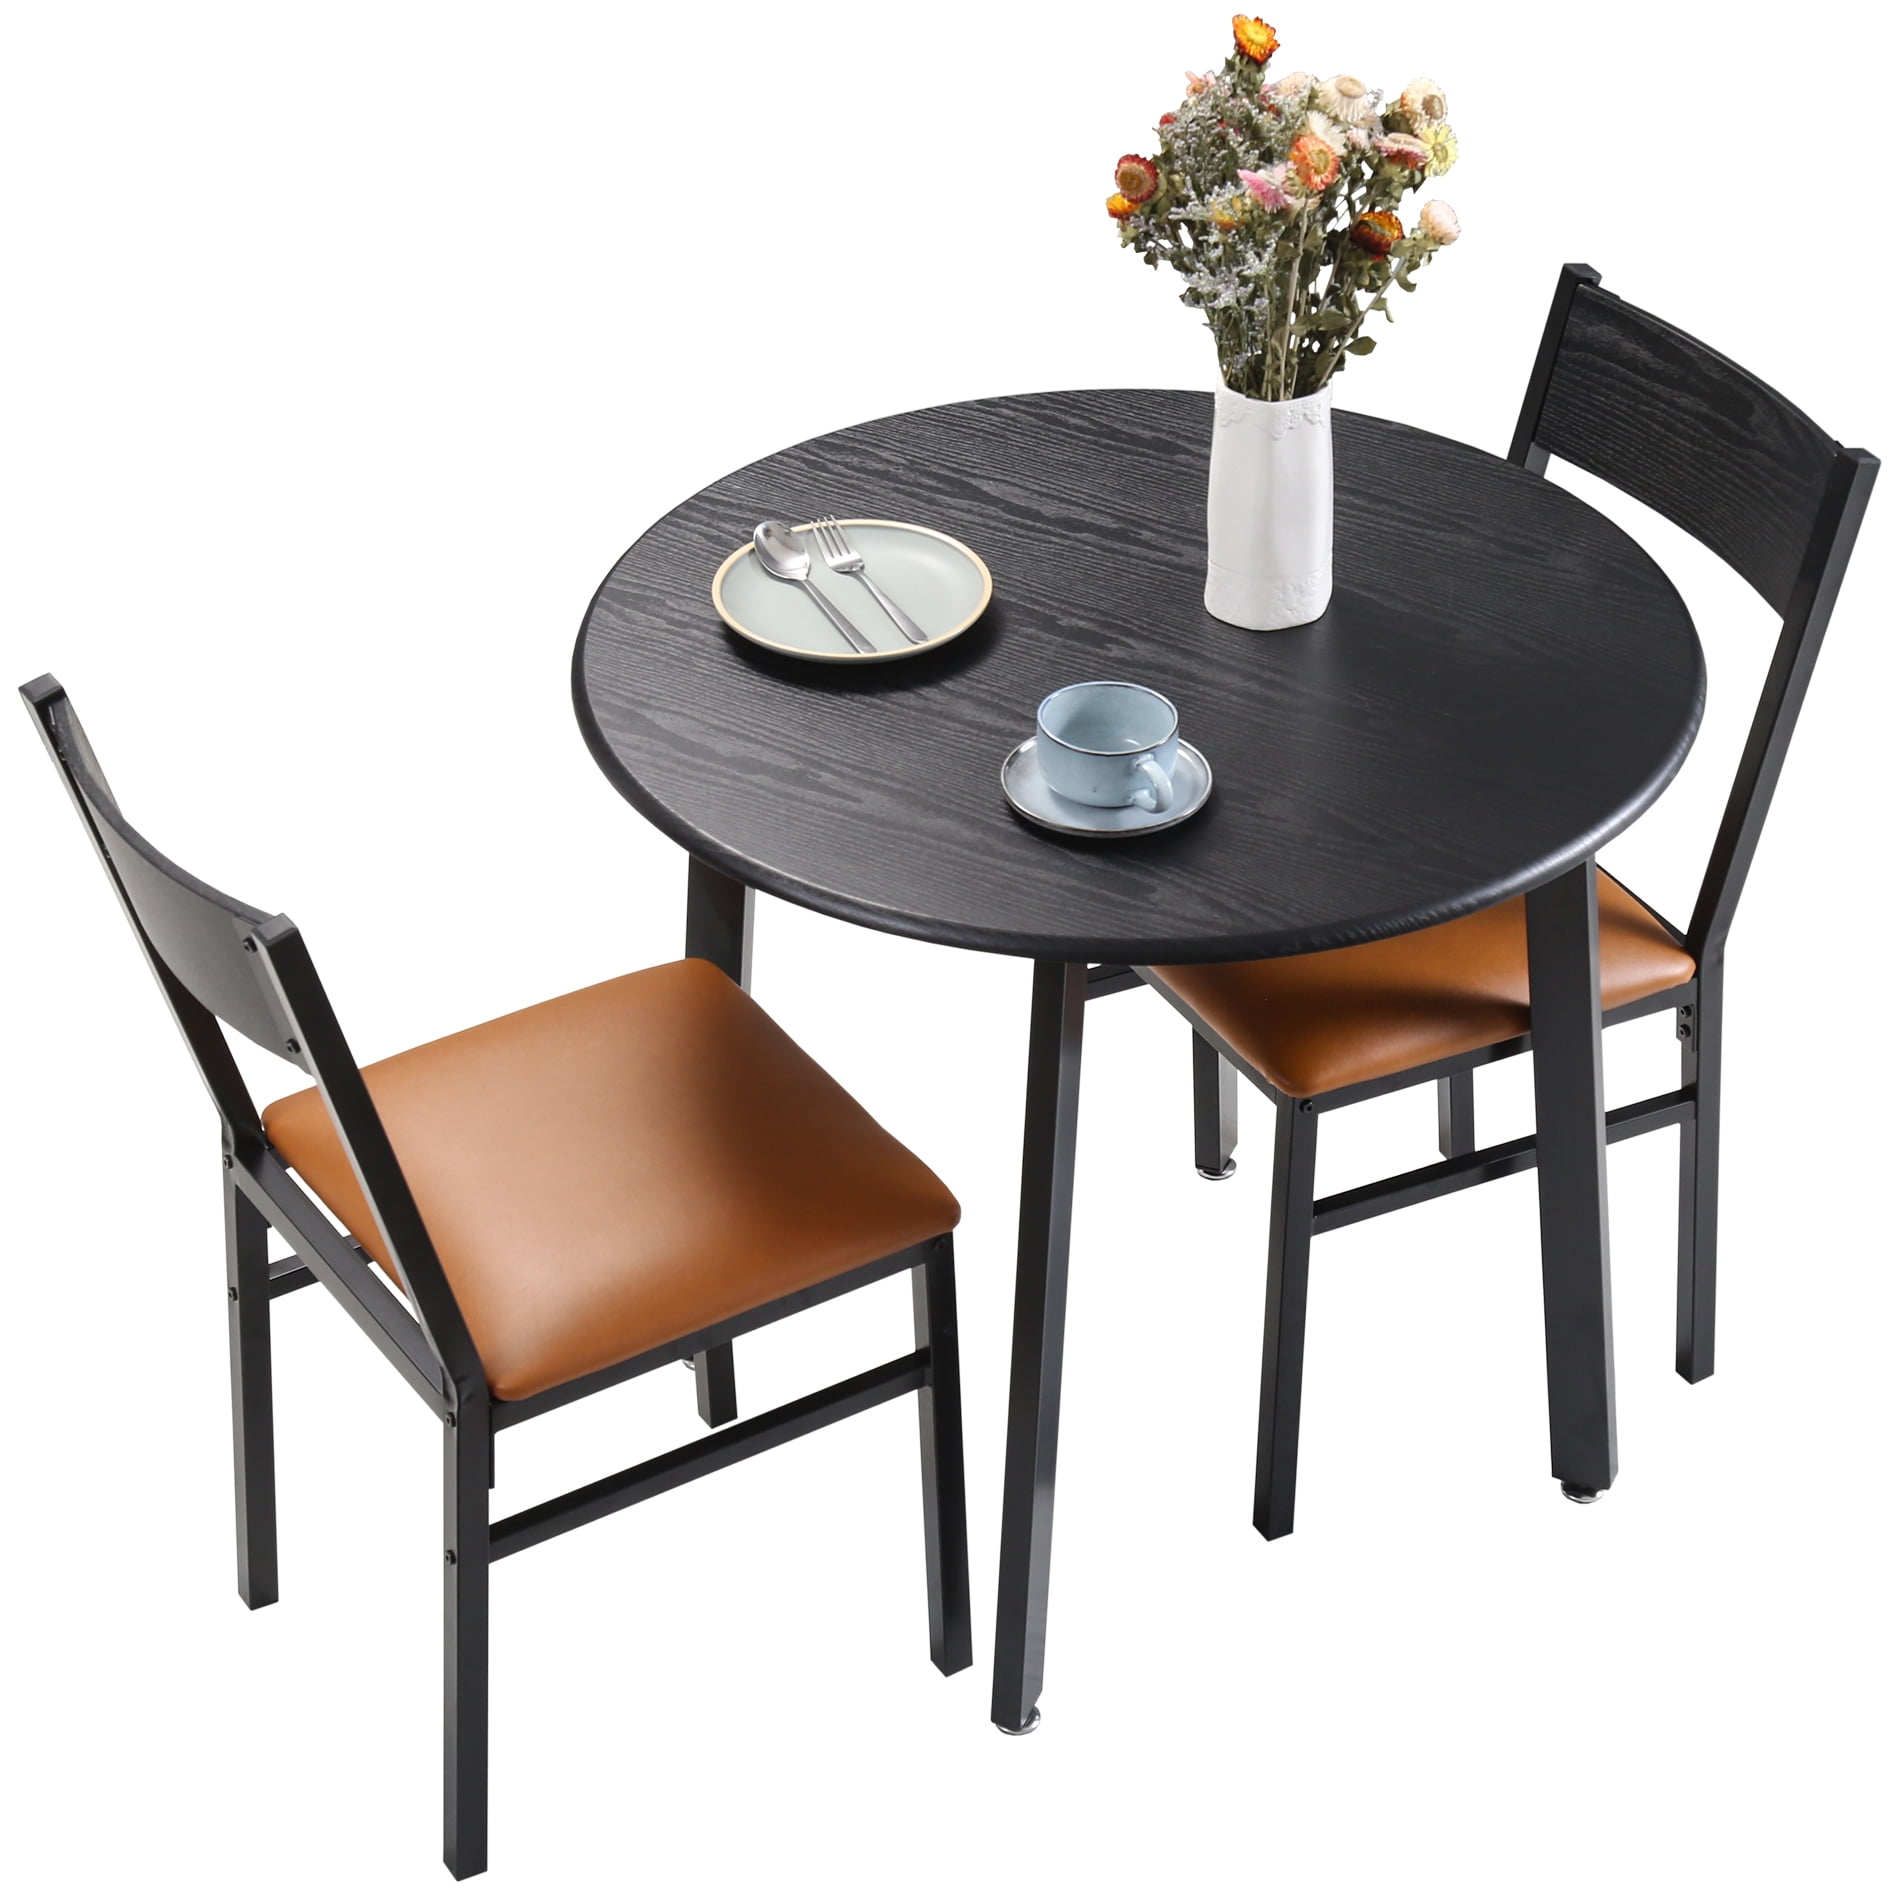 3 Piece Round Dining Table Set with Cushioned Chairs for Dining Room